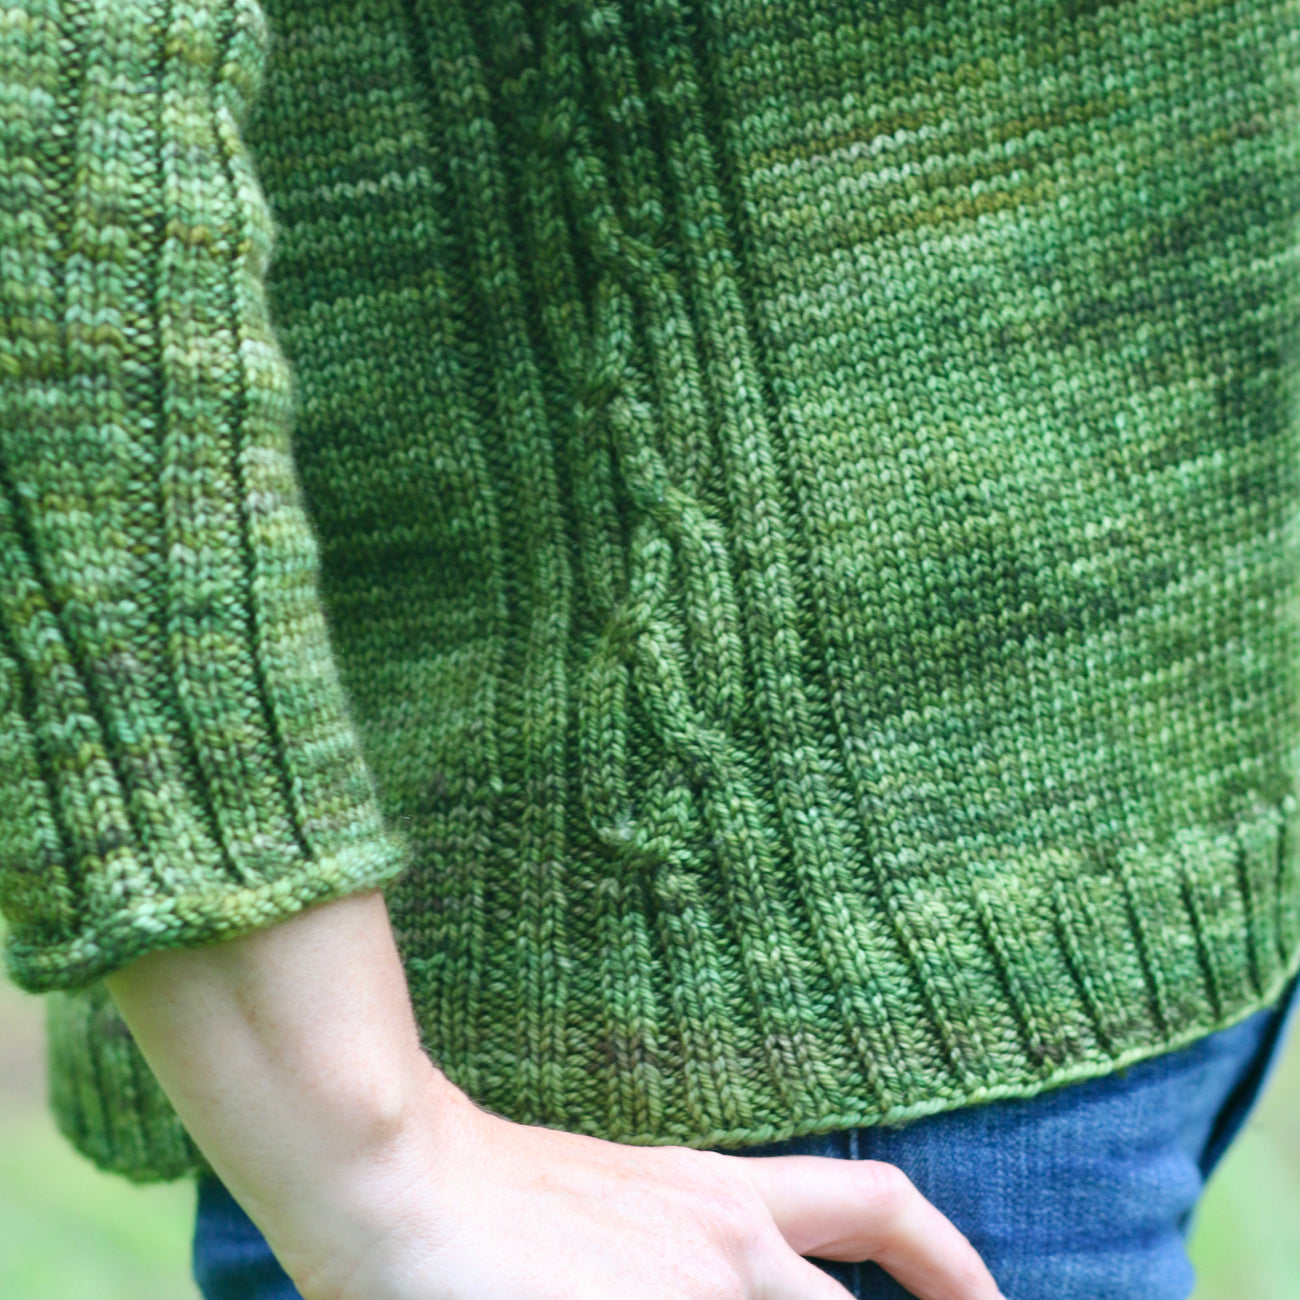 Easy Knitting Projects For Gifts  Free Patterns! - The Sweater Collective